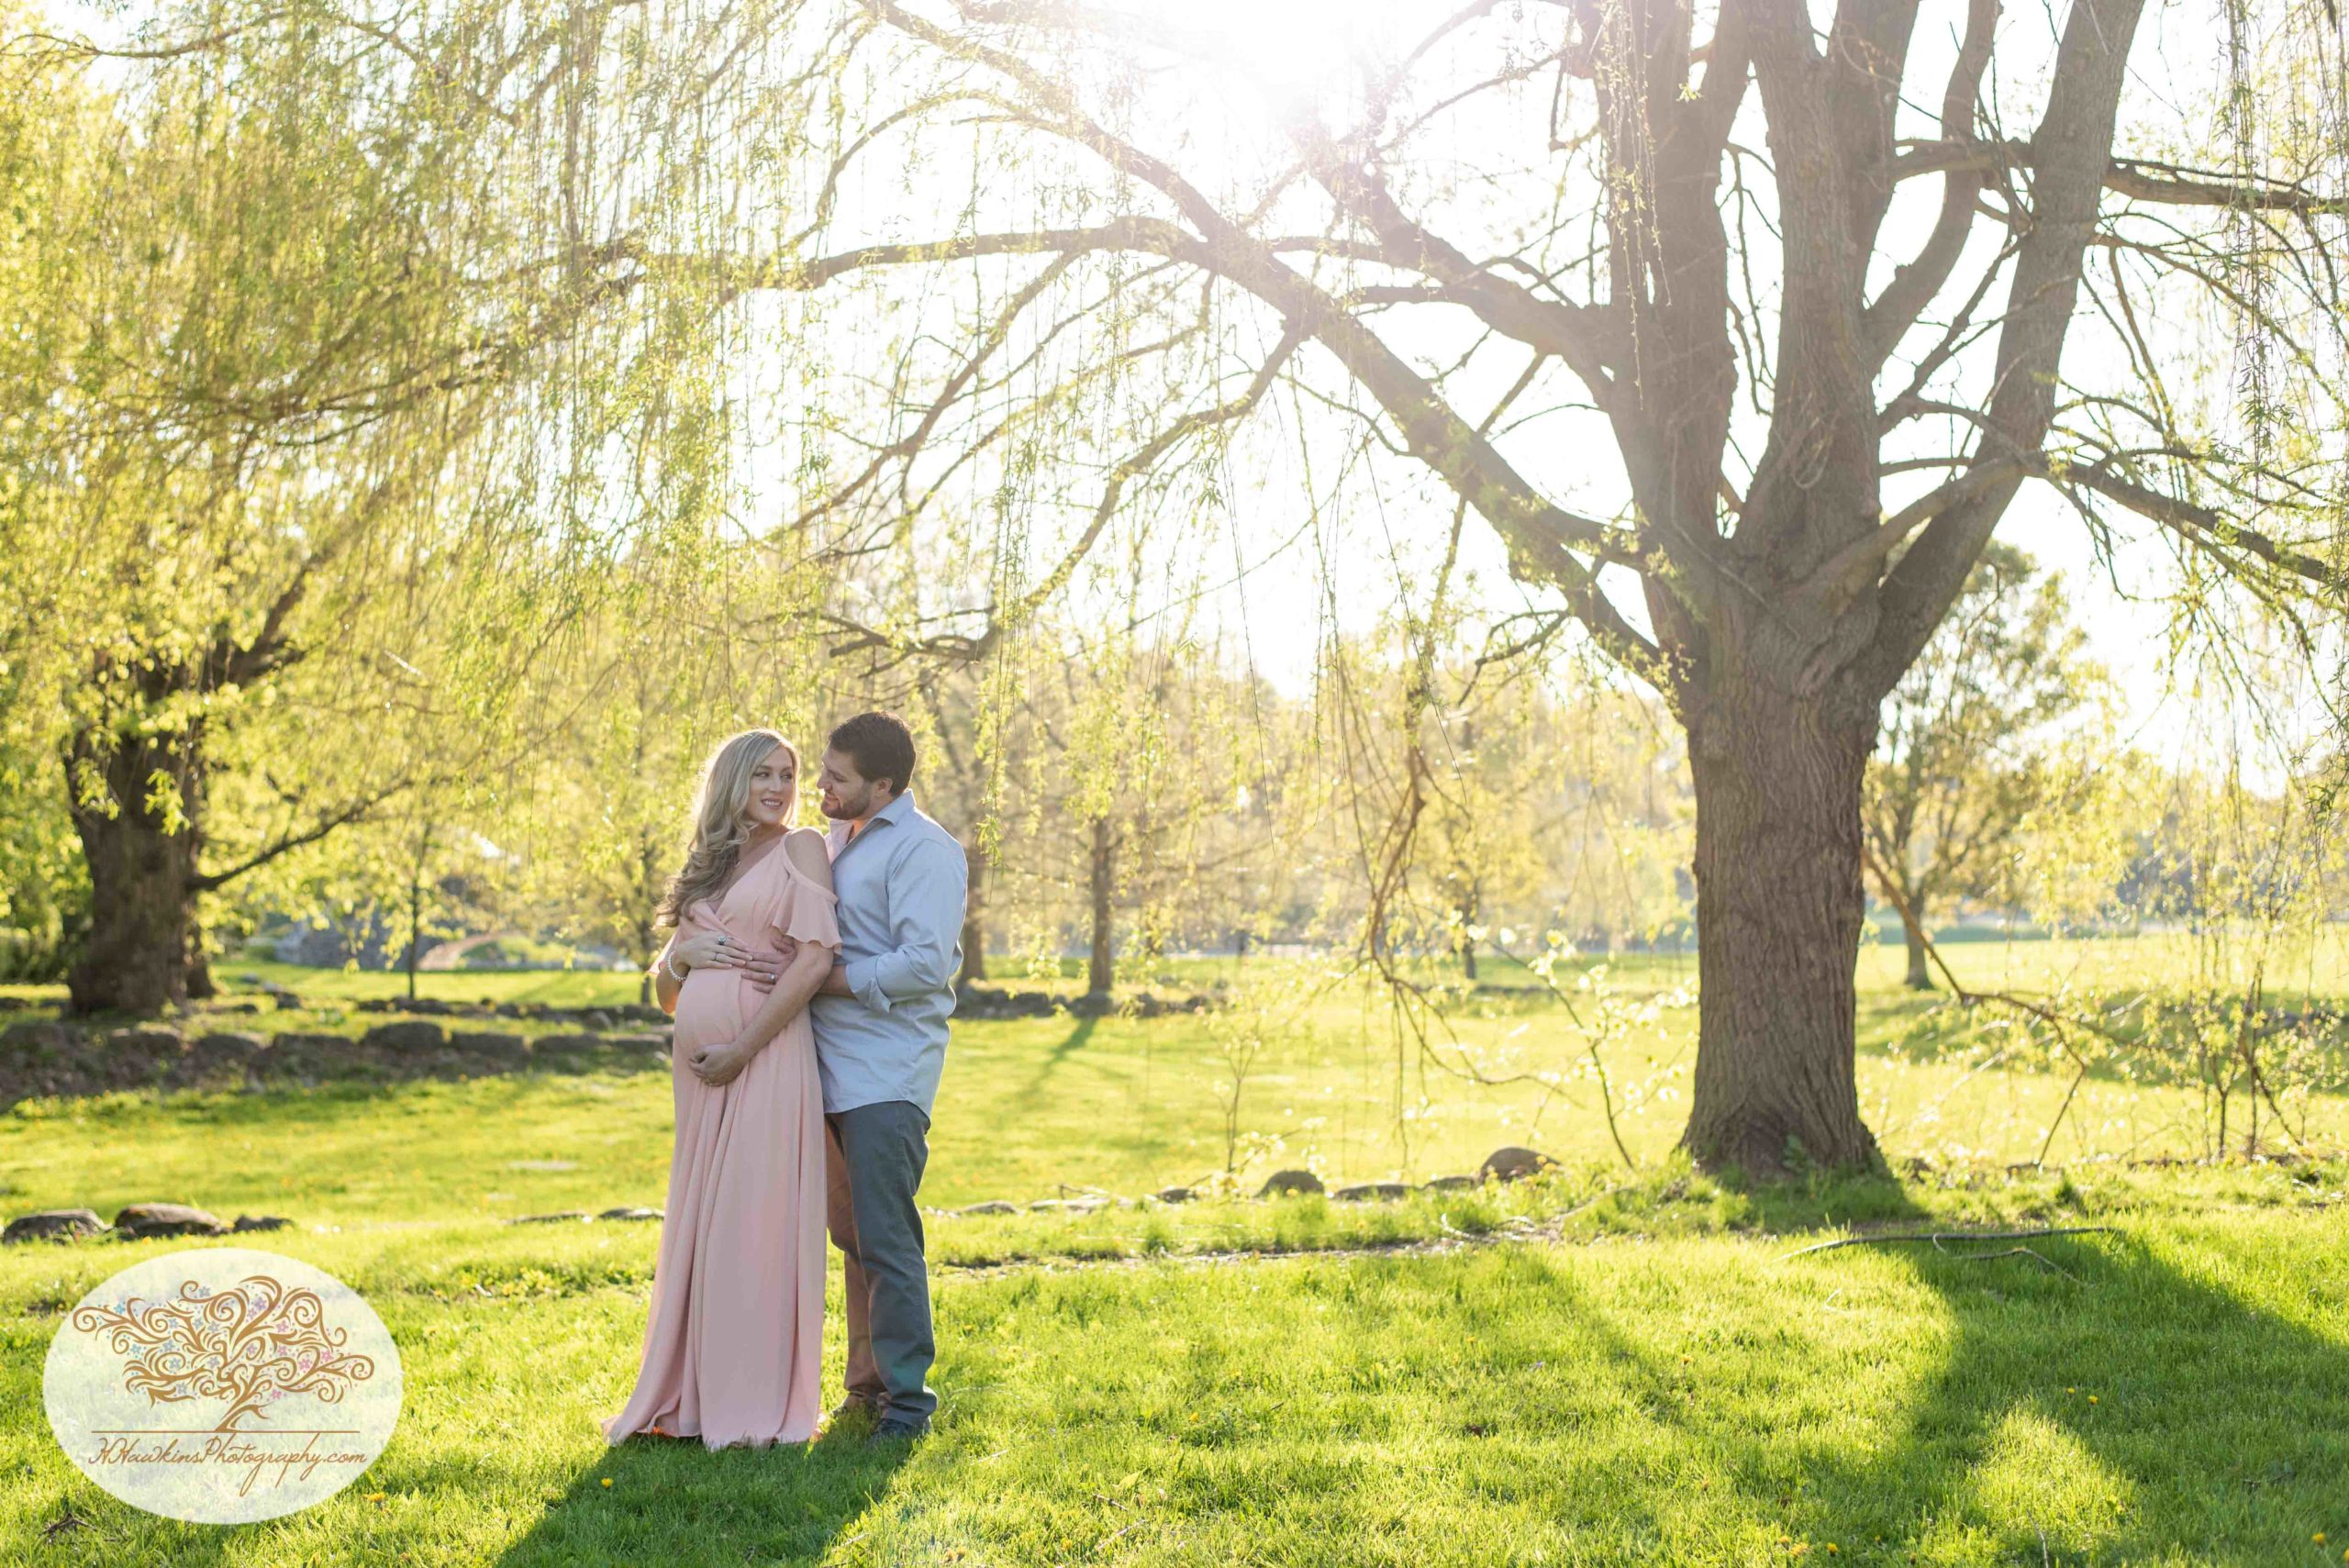 Expectant mom to be with her husband stands in front of weeping willow tree